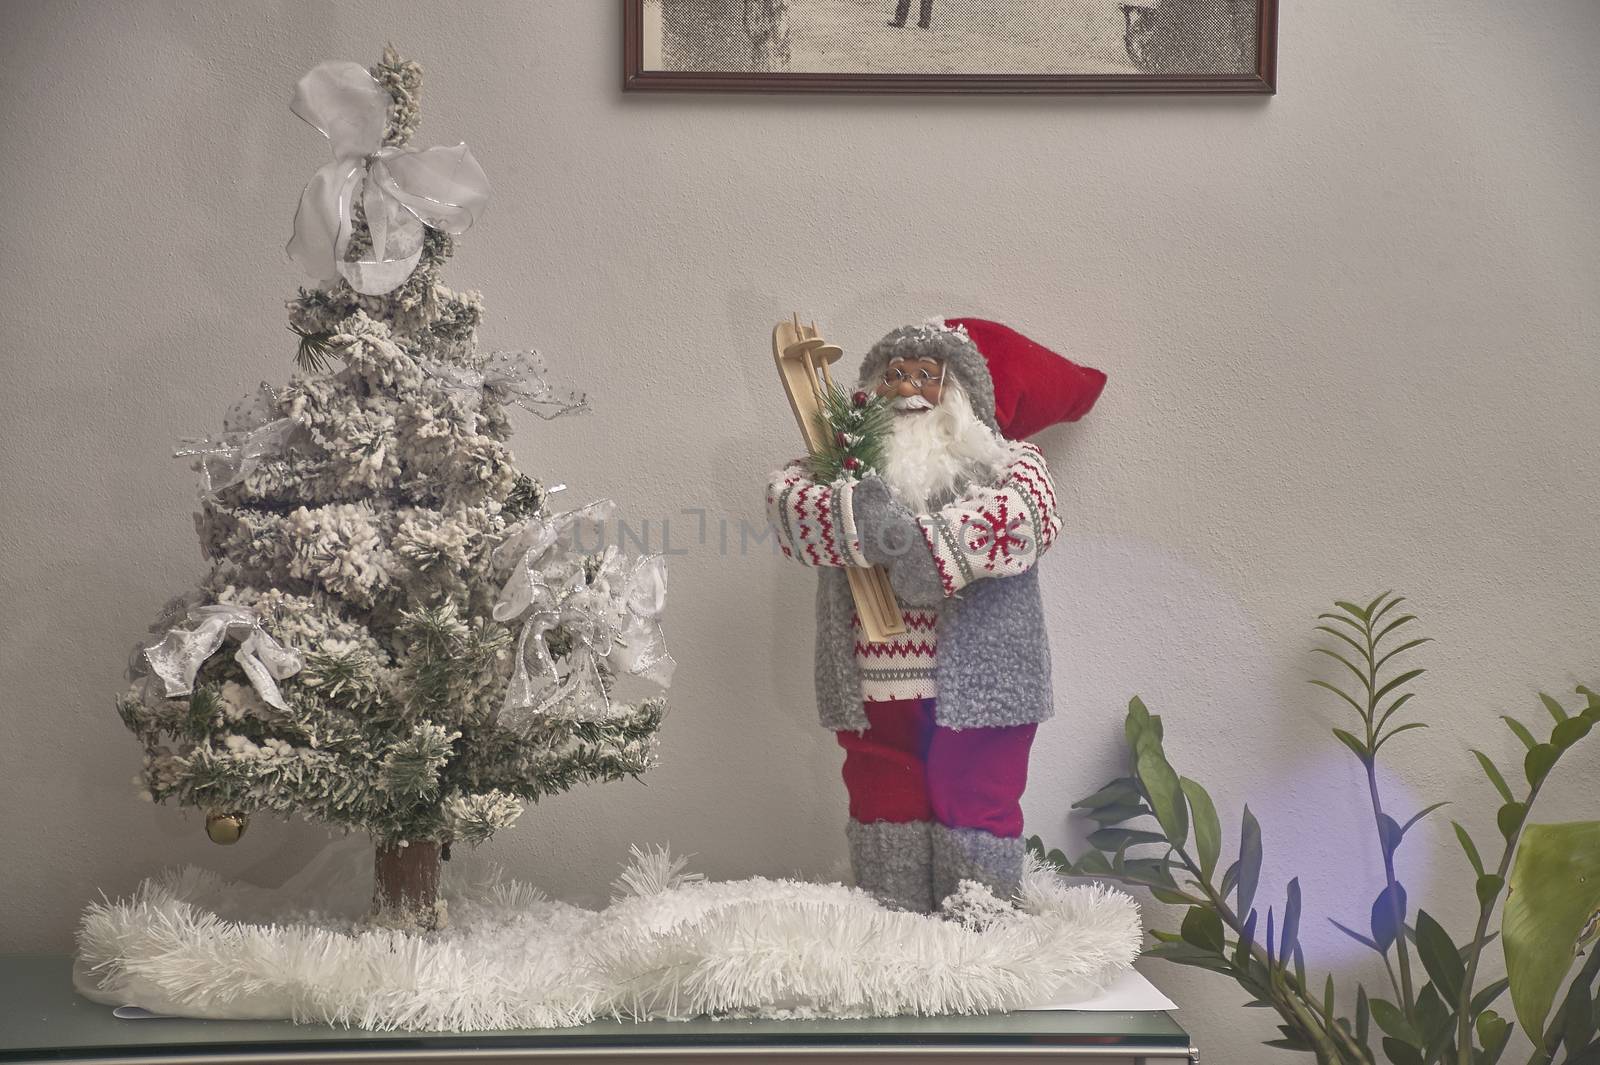 Set of Christmas decorations of interiors composed of a statue of Santa Claus and a fake Christmas tree resting on a piece of furniture.